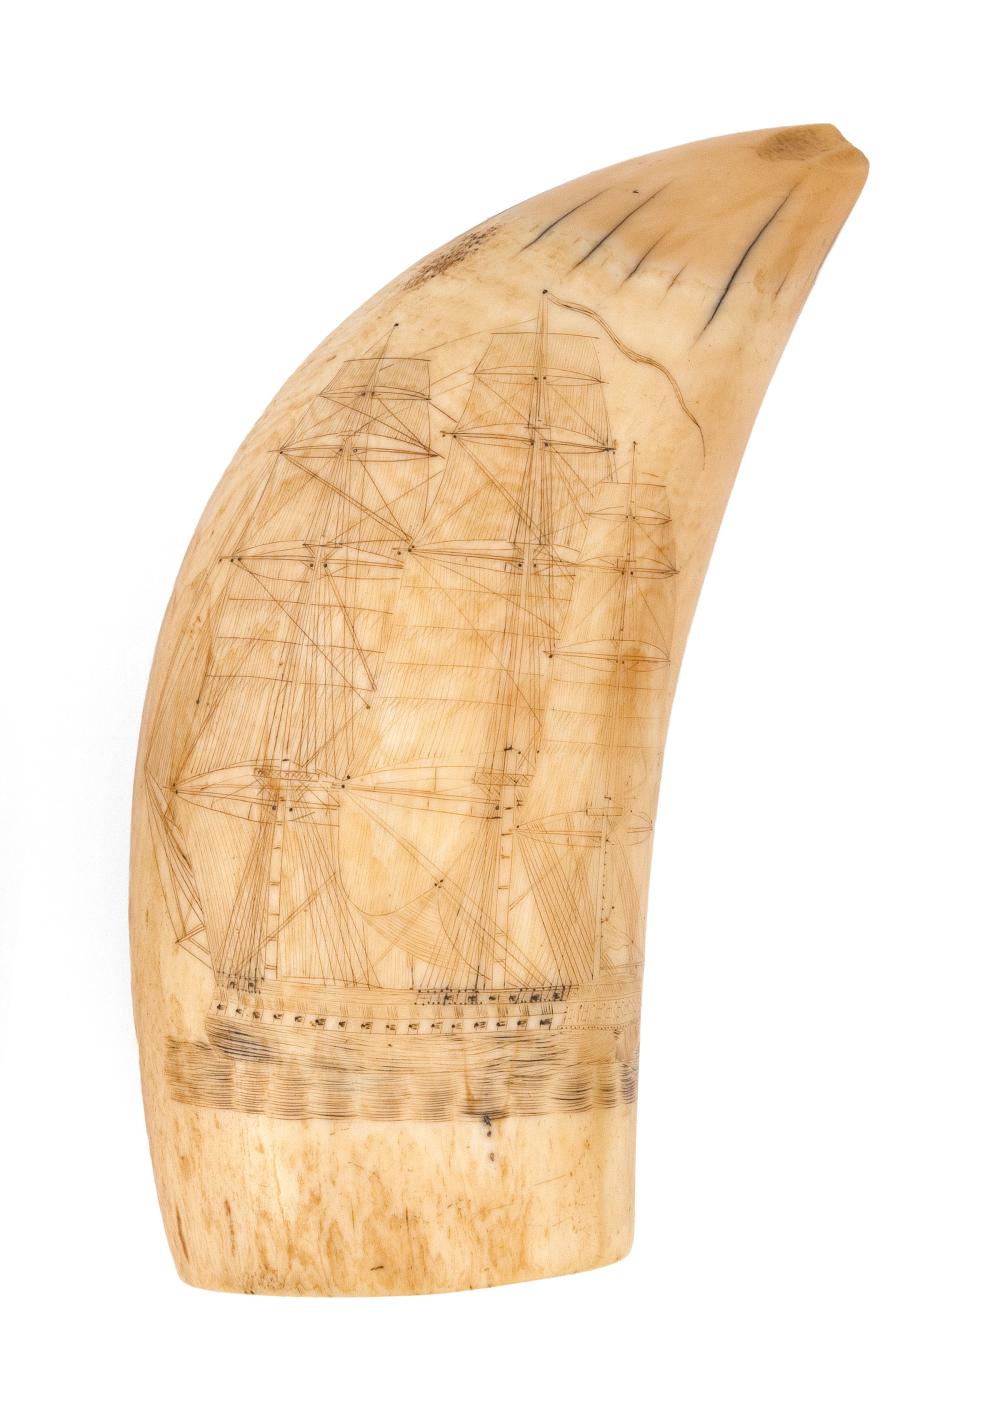 SCRIMSHAW WHALE S TOOTH DEPICTING 34c650